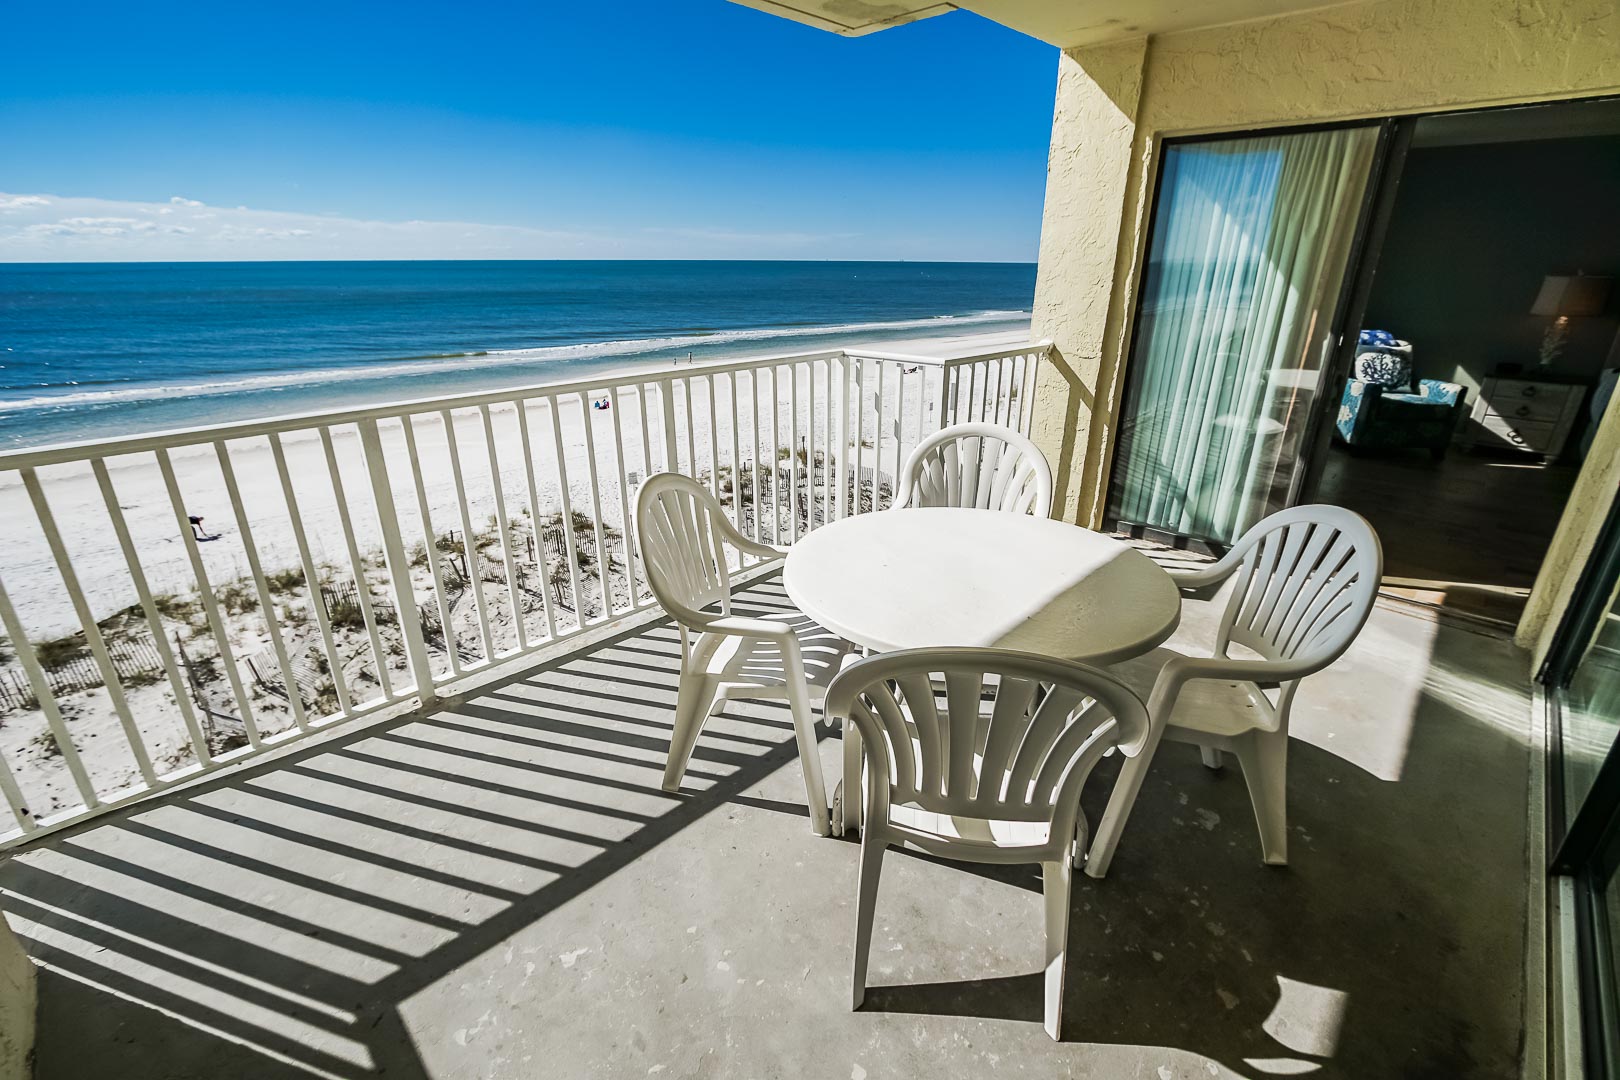 A beautiful view from the balcony at VRI's Shoreline Towers in Gulf Shores, Alabama.